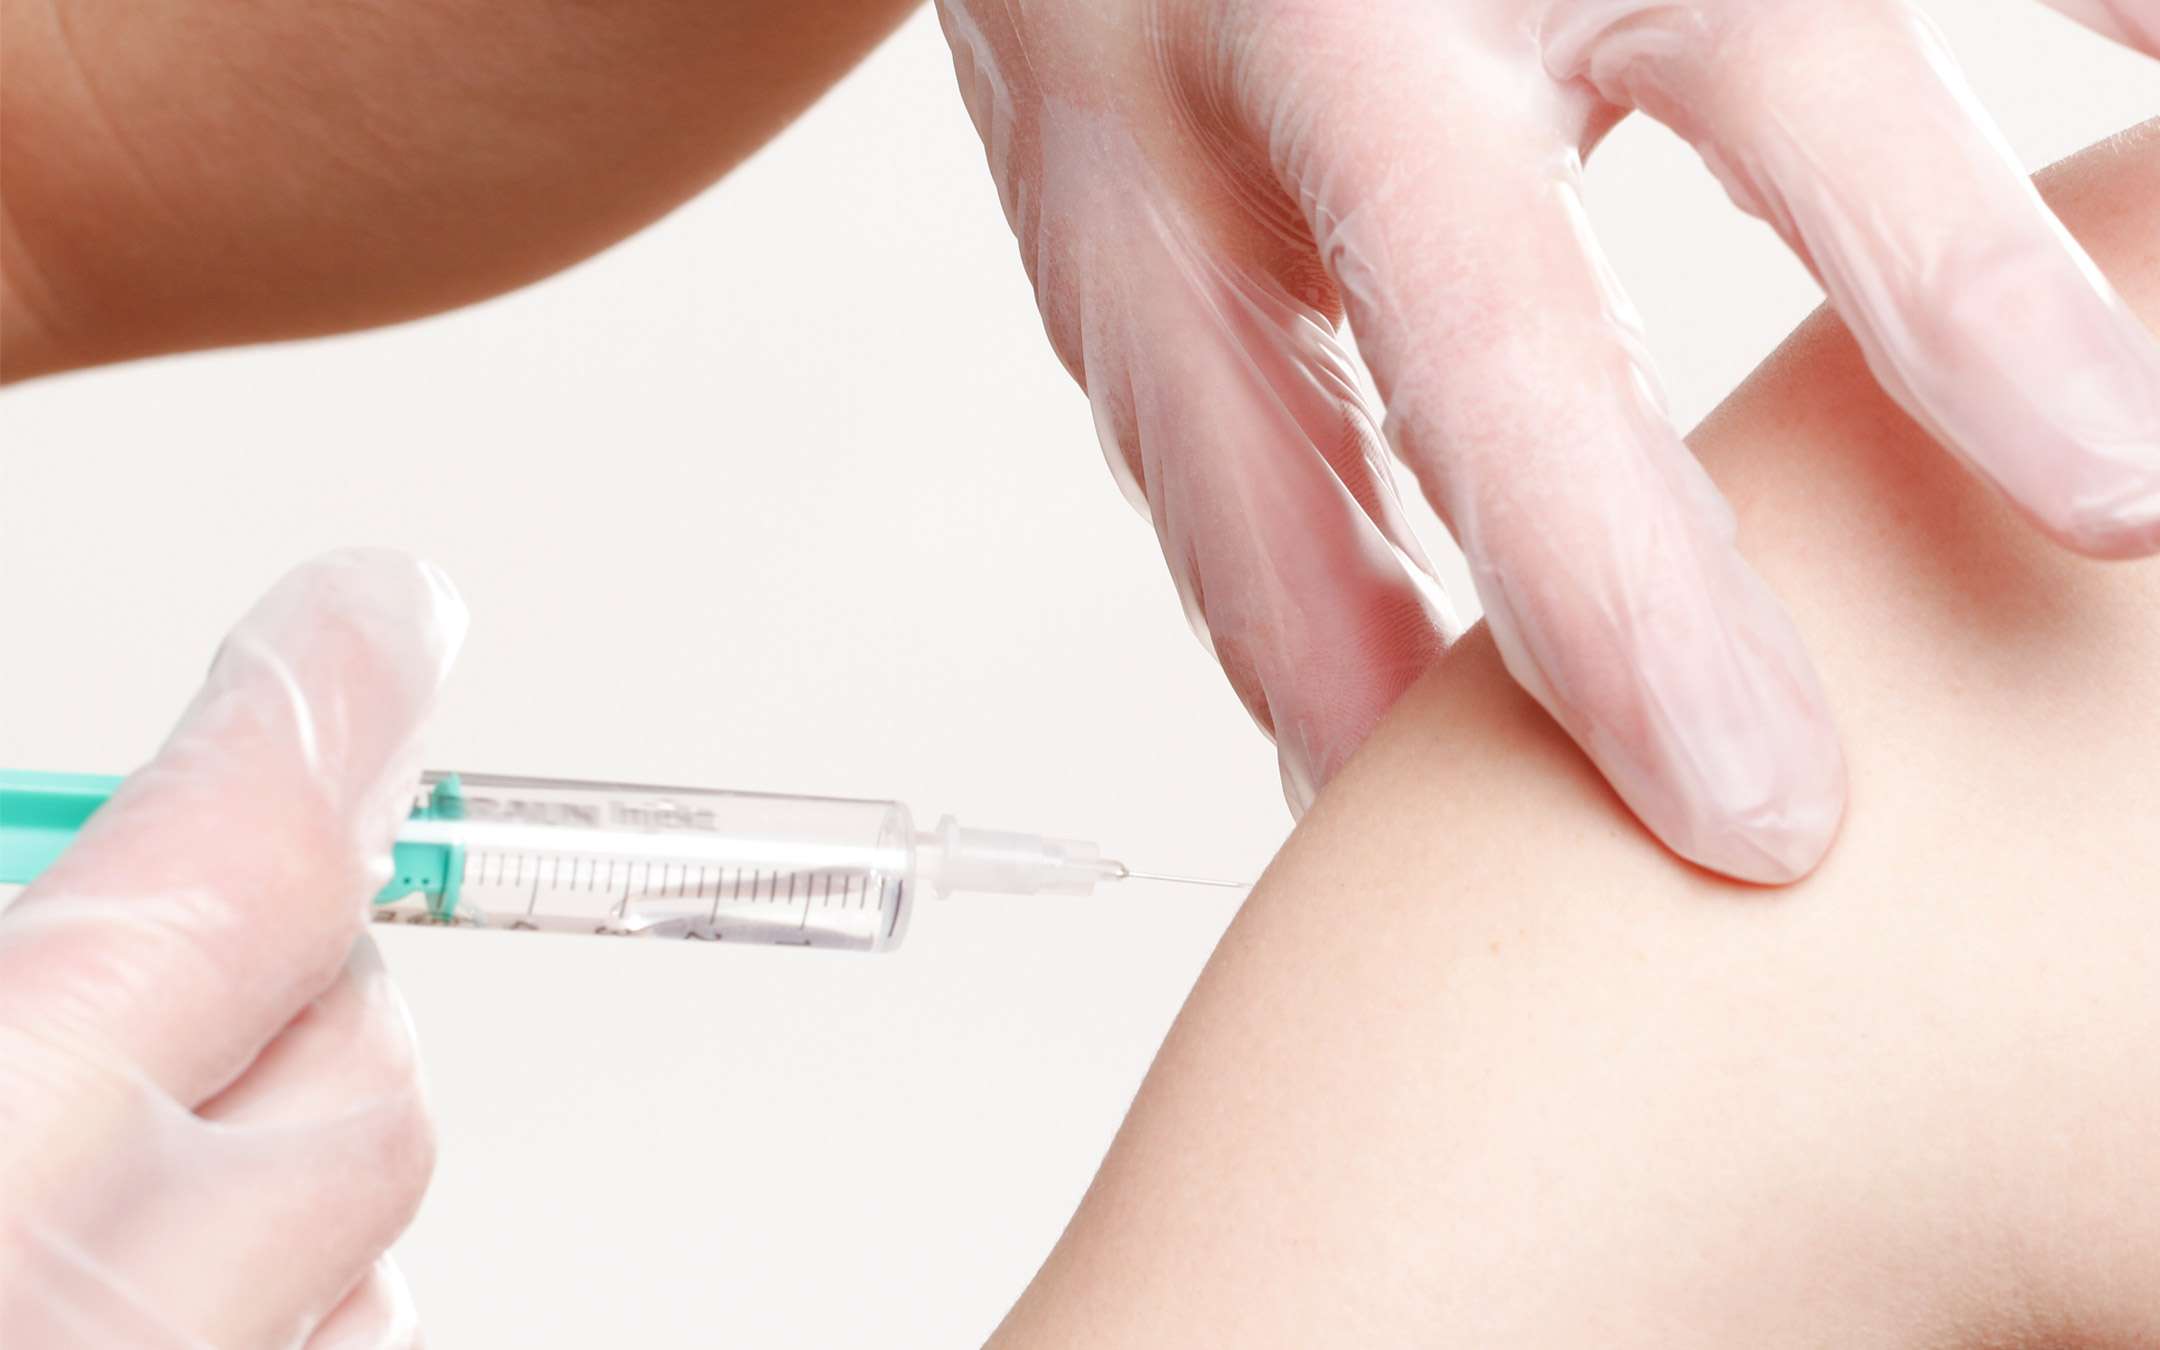 Is Cybercrime Pointing to the Cold Chain of Vaccines?